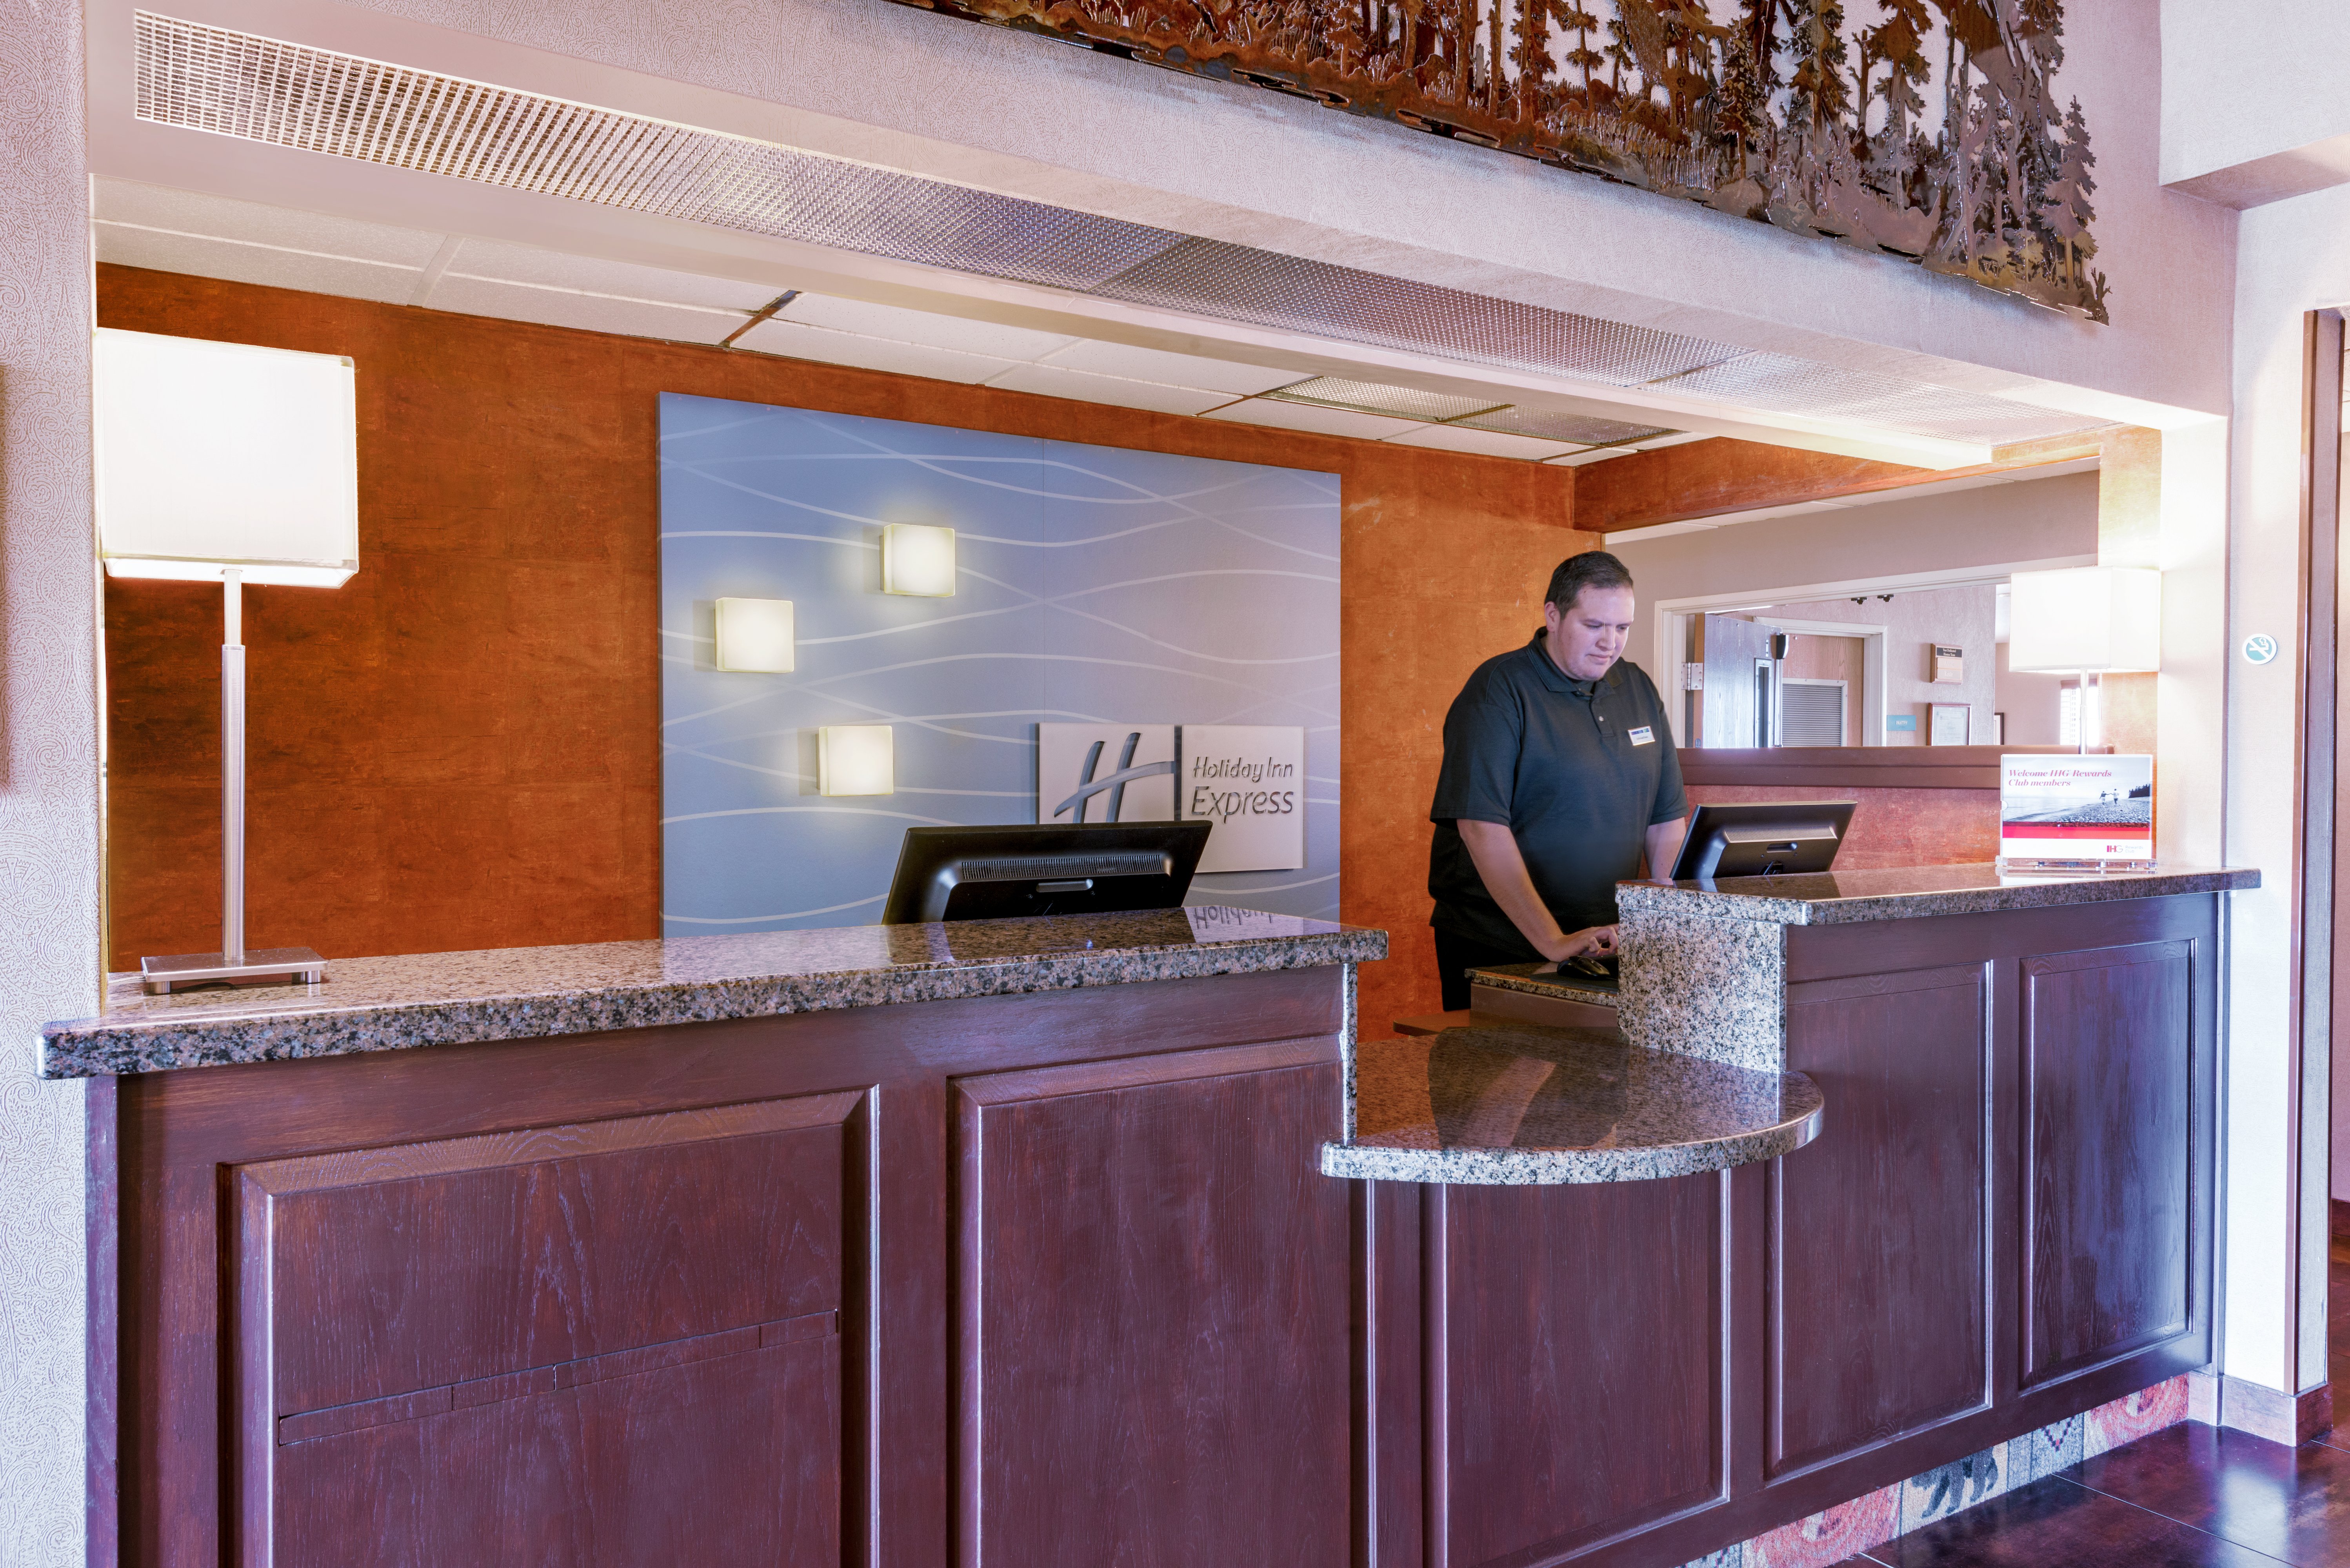 Our Raton NM hotel front desk staff is ready to assist you!